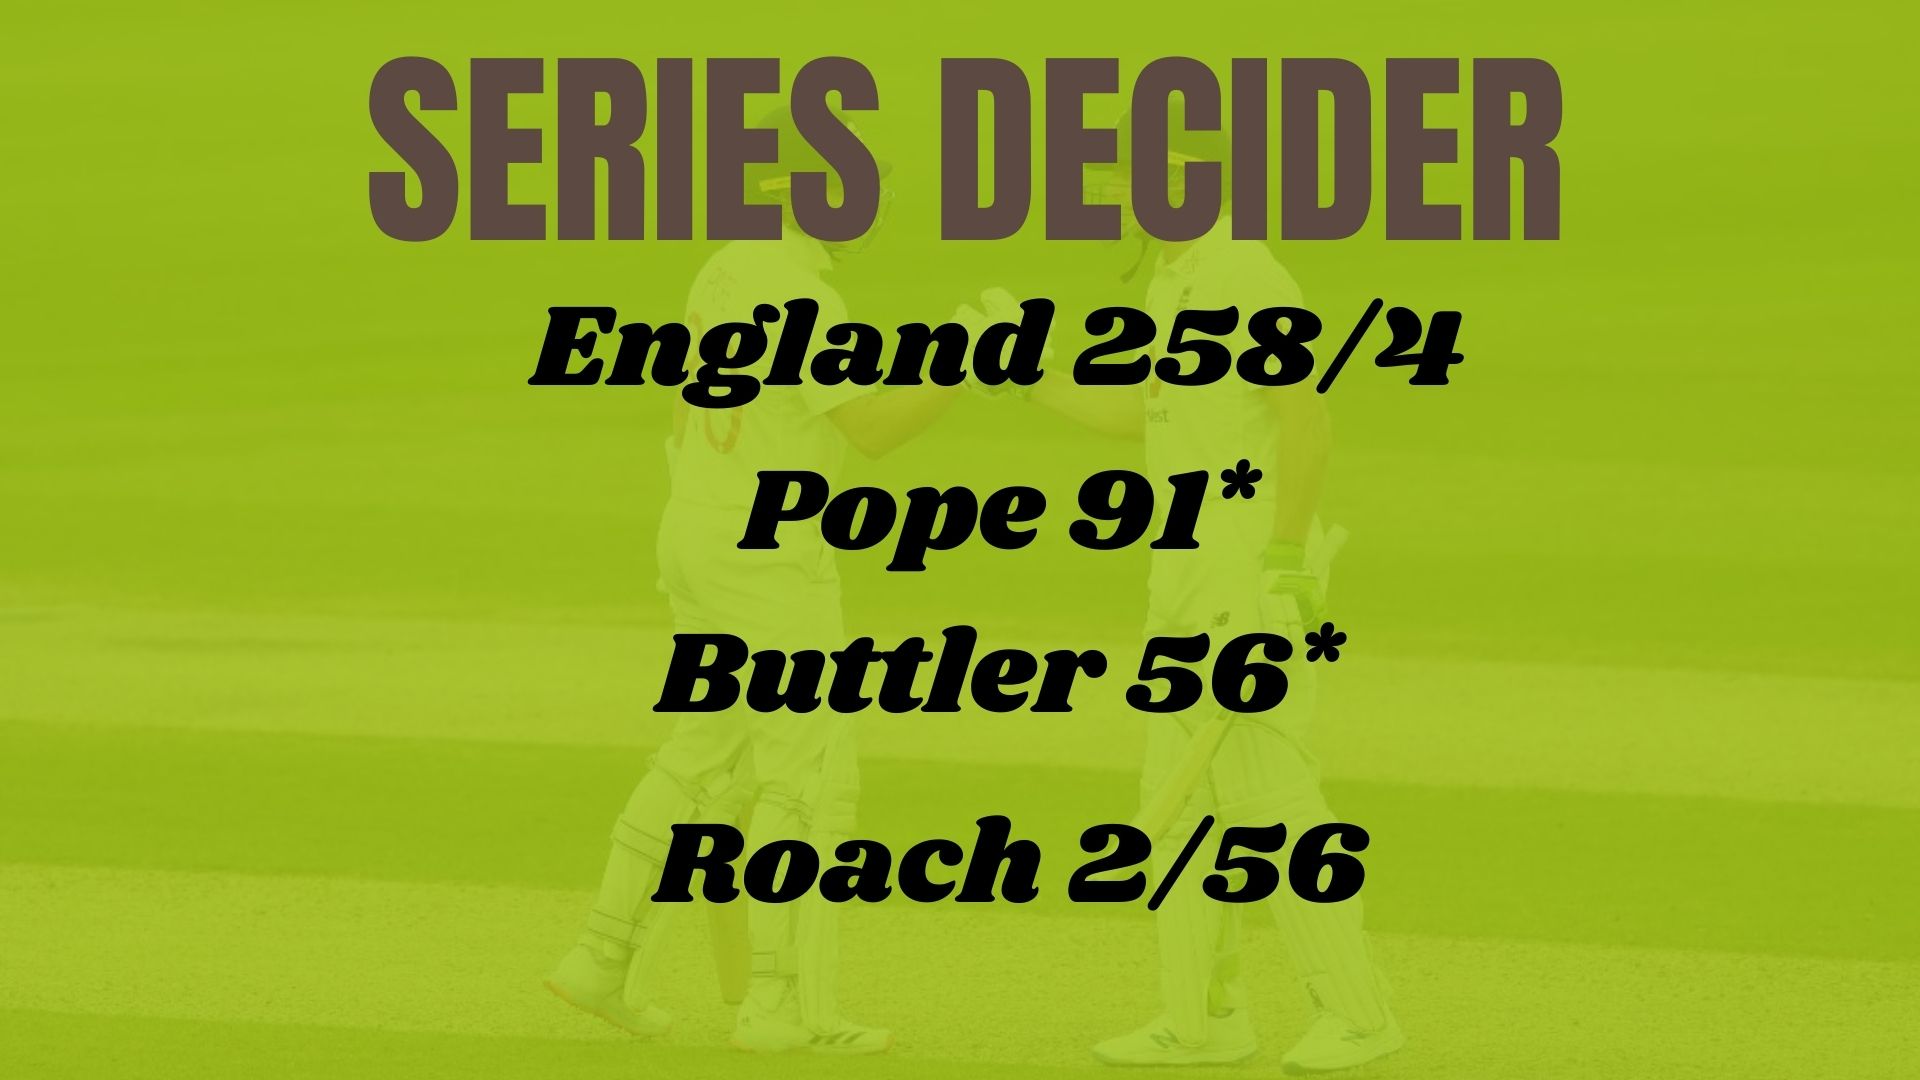 ENG vs WI: Ollie Pope, Jos Buttler steer England to 258/4 on Day 1